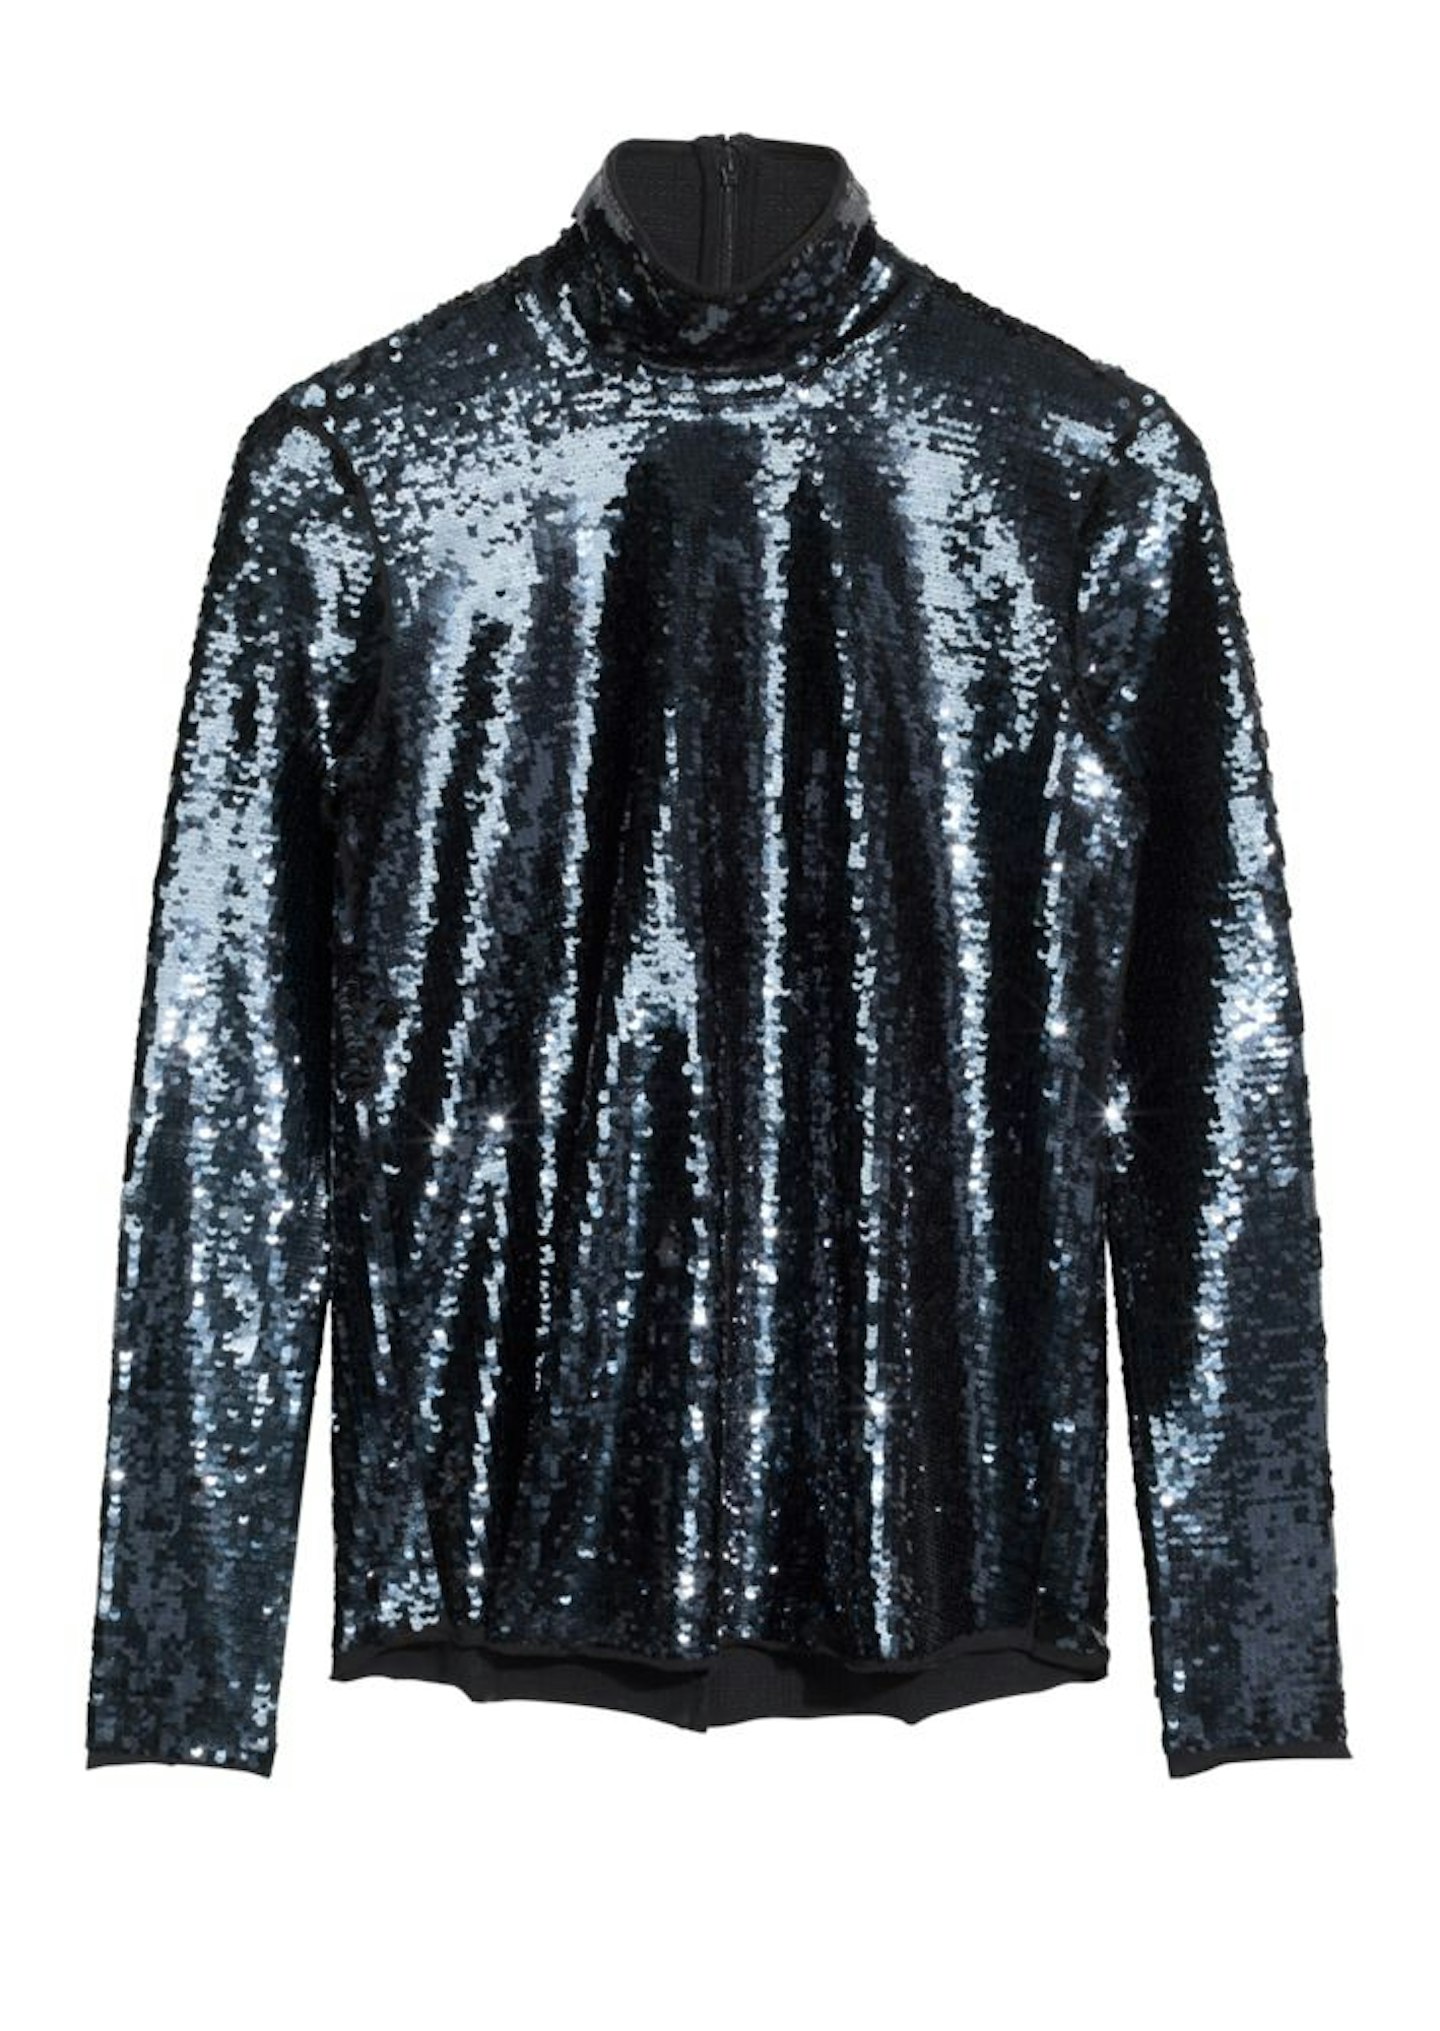 Shimmery top